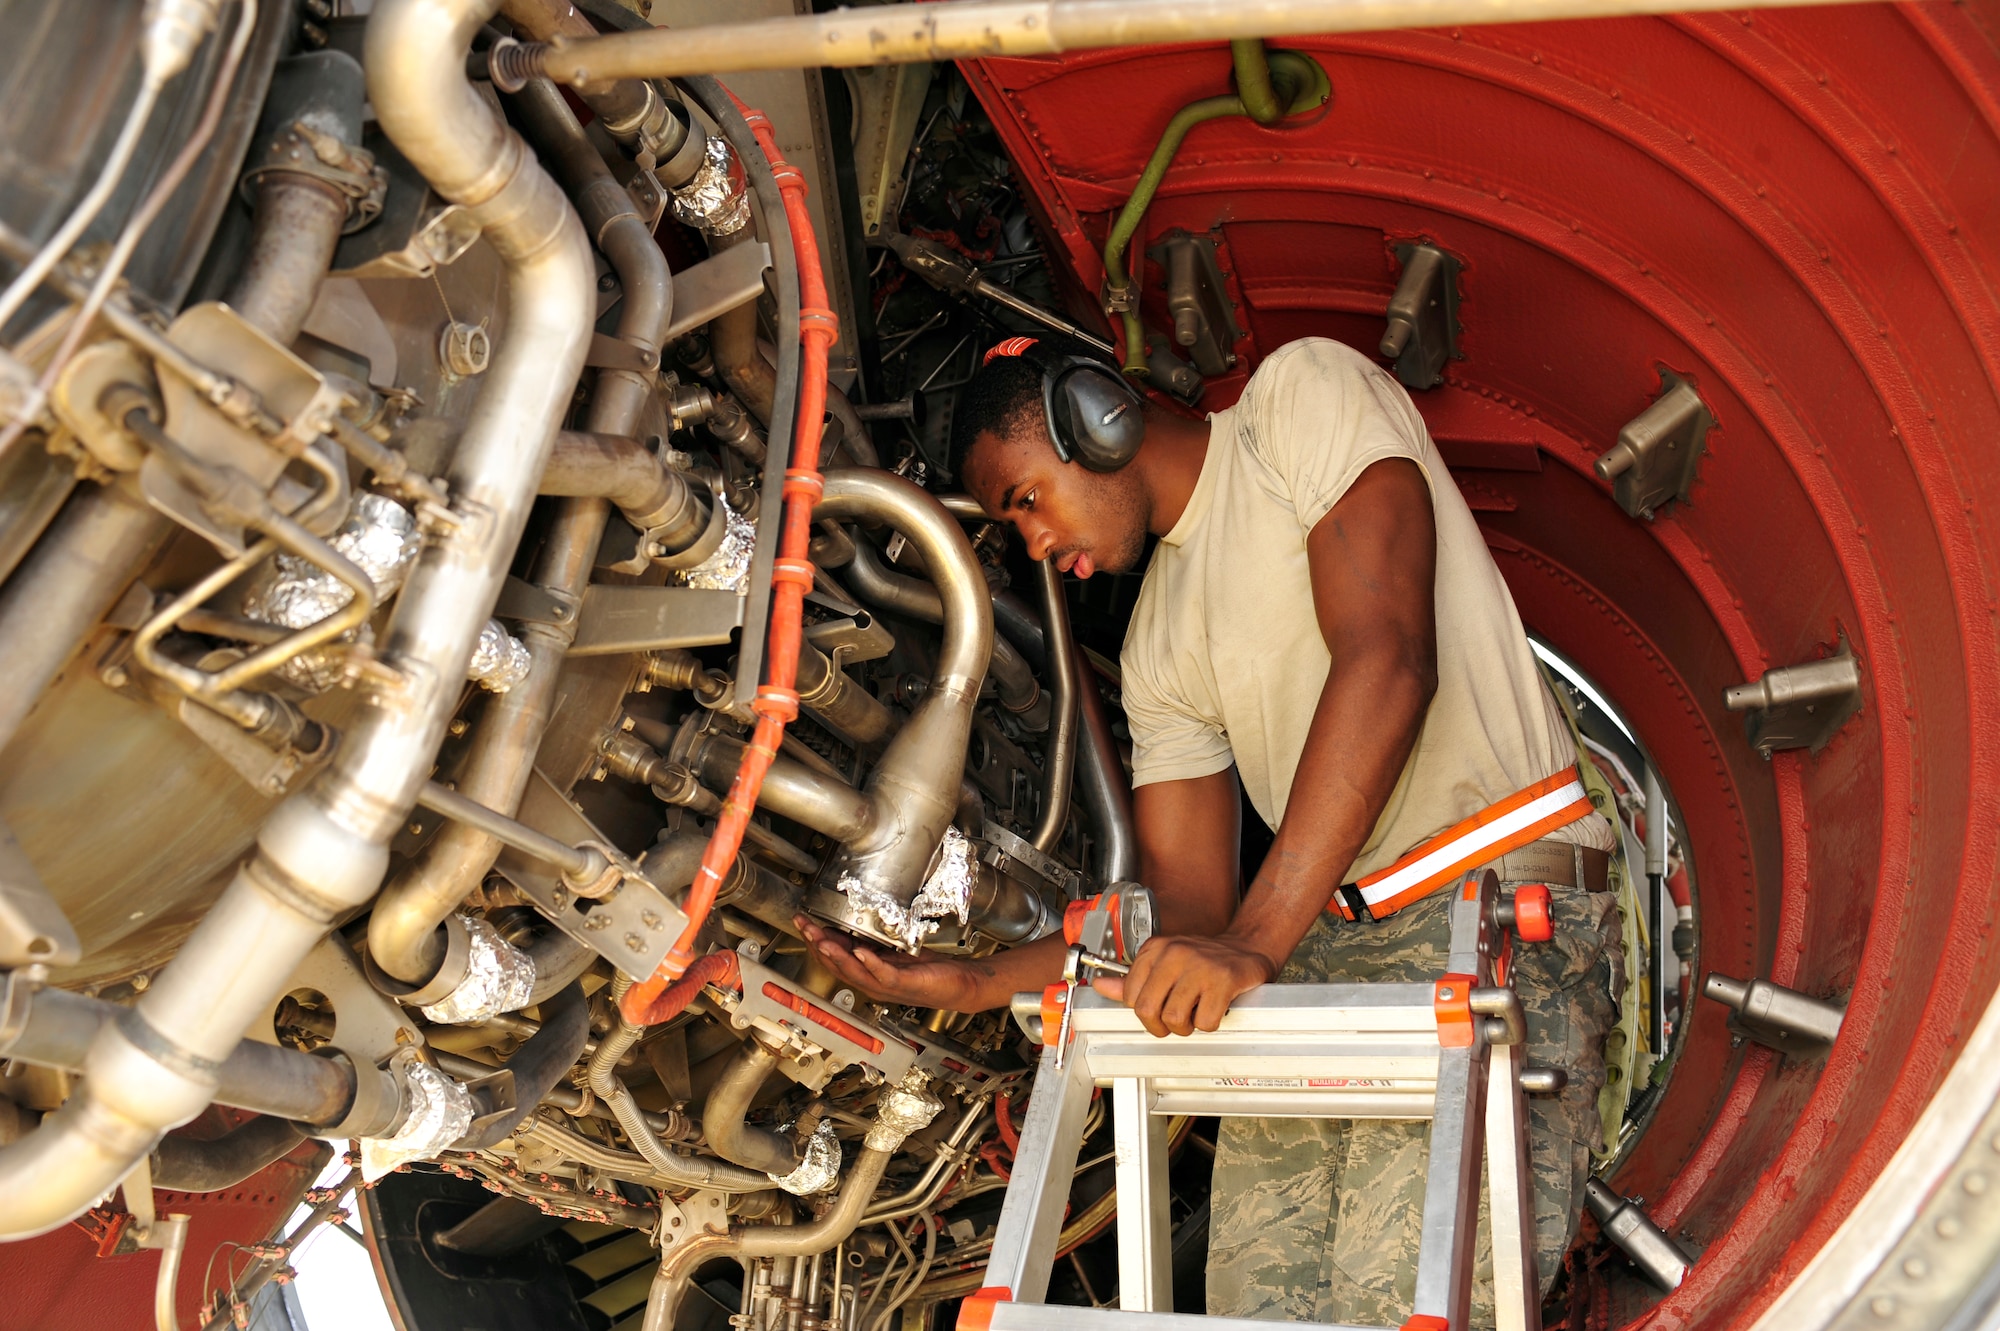 SOUTHWEST ASIA -Airman 1st Class Mareguis Killebrew, 380th Expeditionary
Maintenance Squadron, checks for leaks on a KC-10 Extender engine Aug. 29,
2009. Airman Killebrew is deployed from Travis Air Force Base, Calif., and
grew up in Savannah, Ga. (U.S. Air Force photo/Tech. Sgt. Charles Larkin Sr)